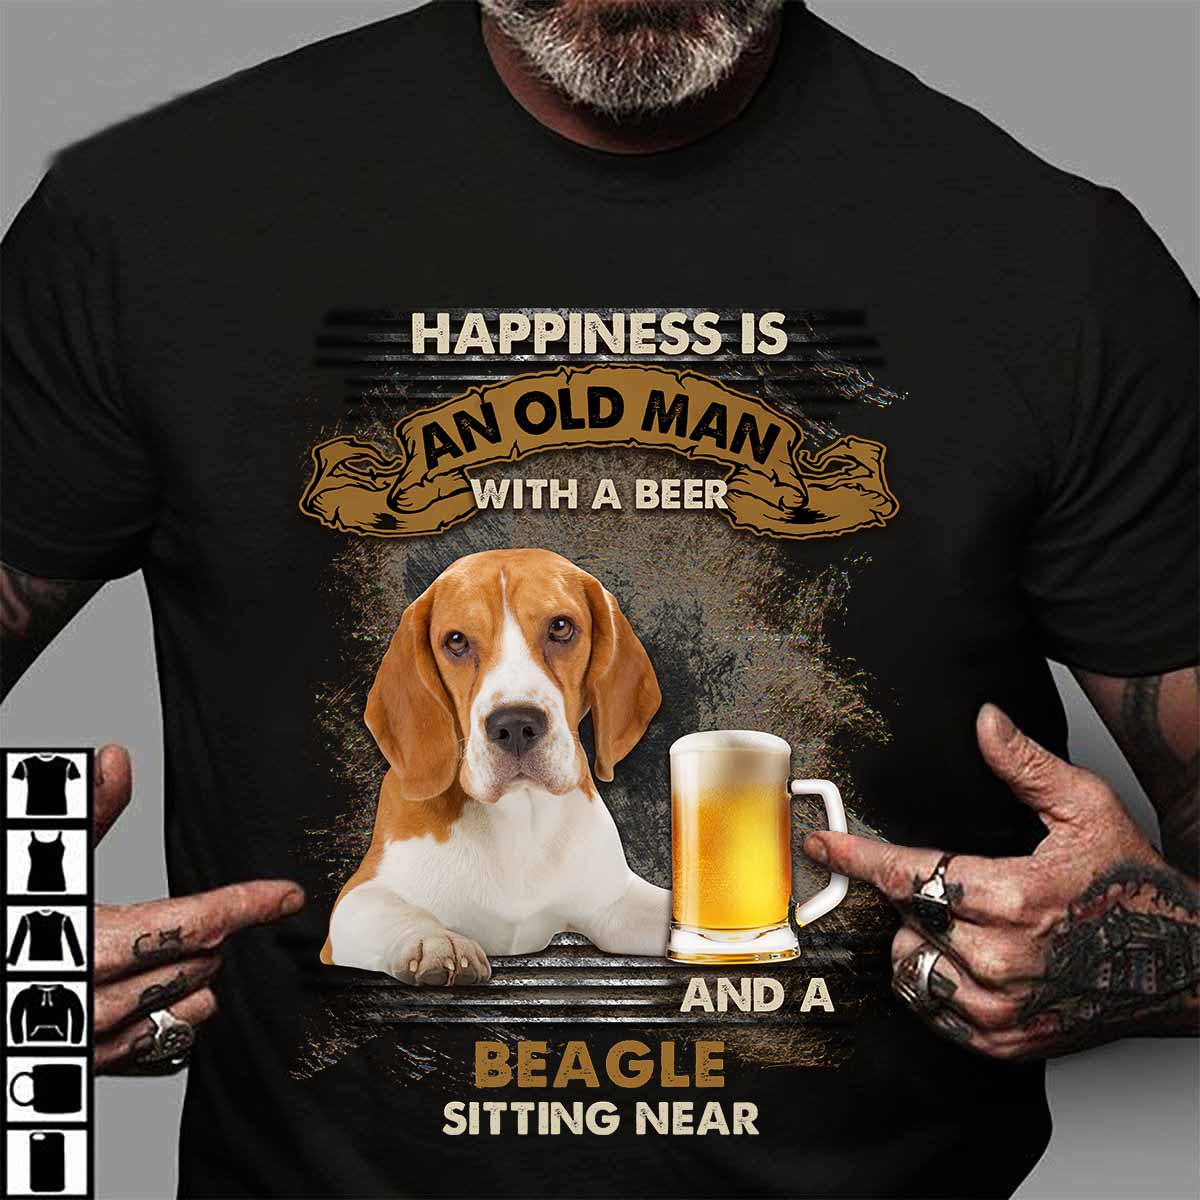 Happiness is an old man with a beer and a beagle sitting near - Beer lover